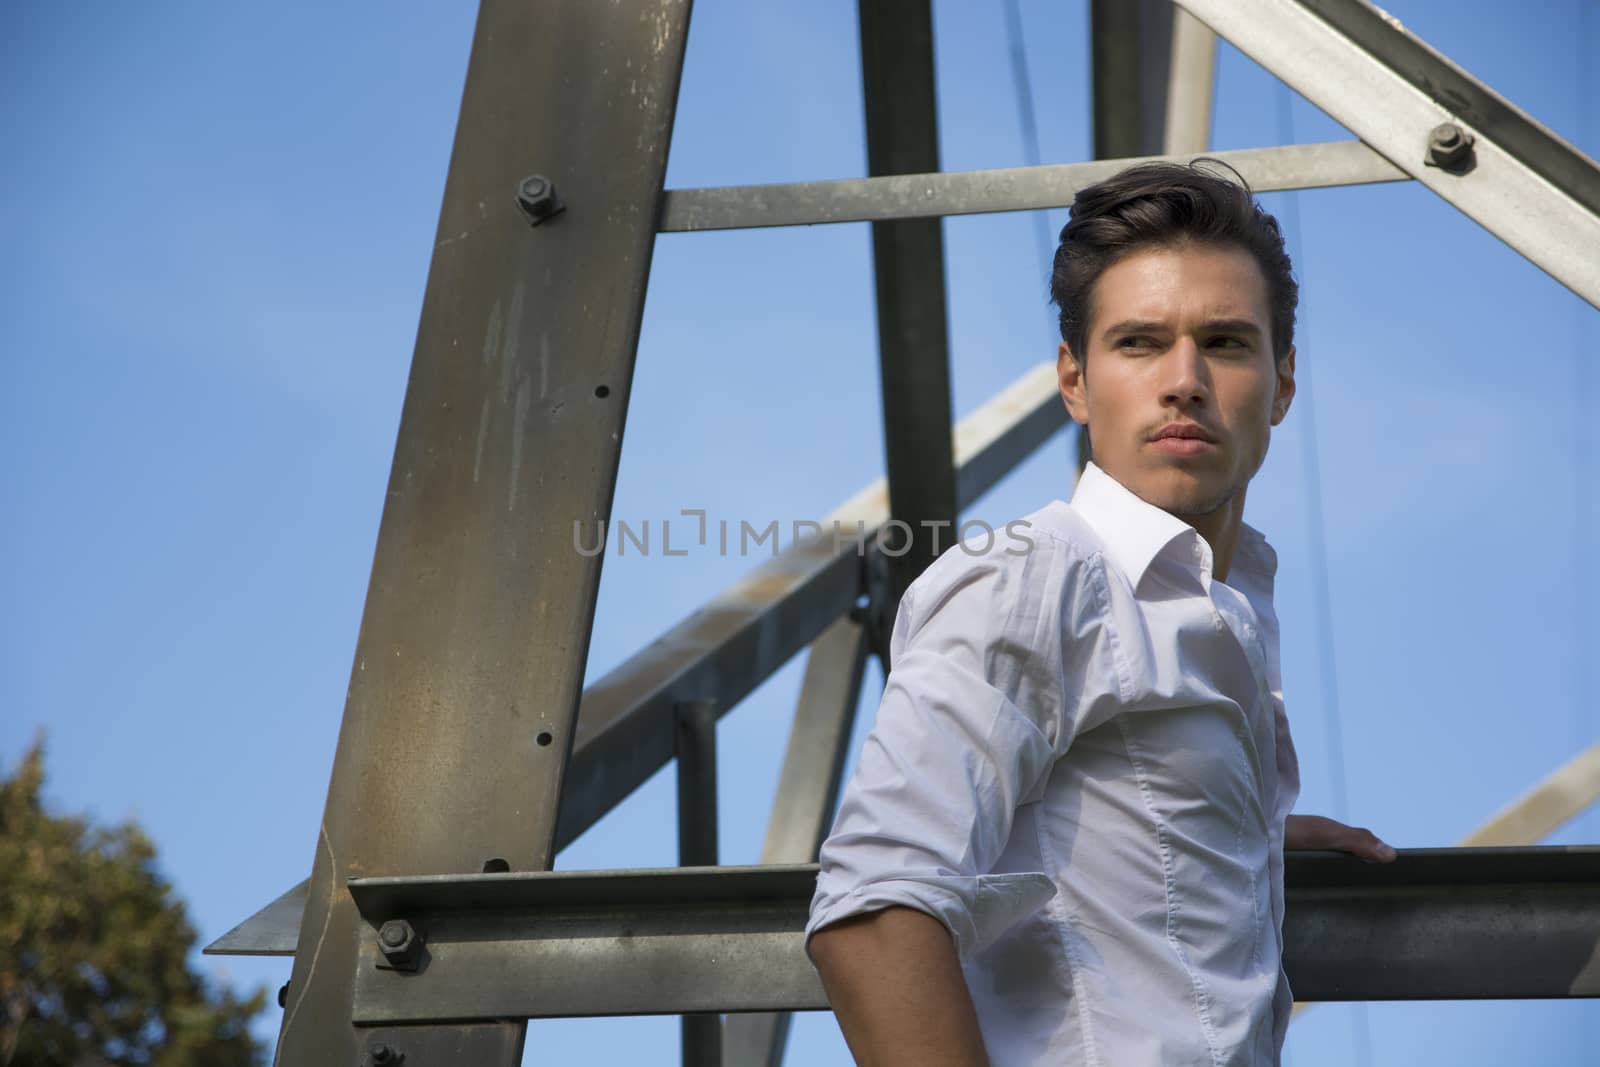 Handsome young man hanging from metal electricity trellis by artofphoto